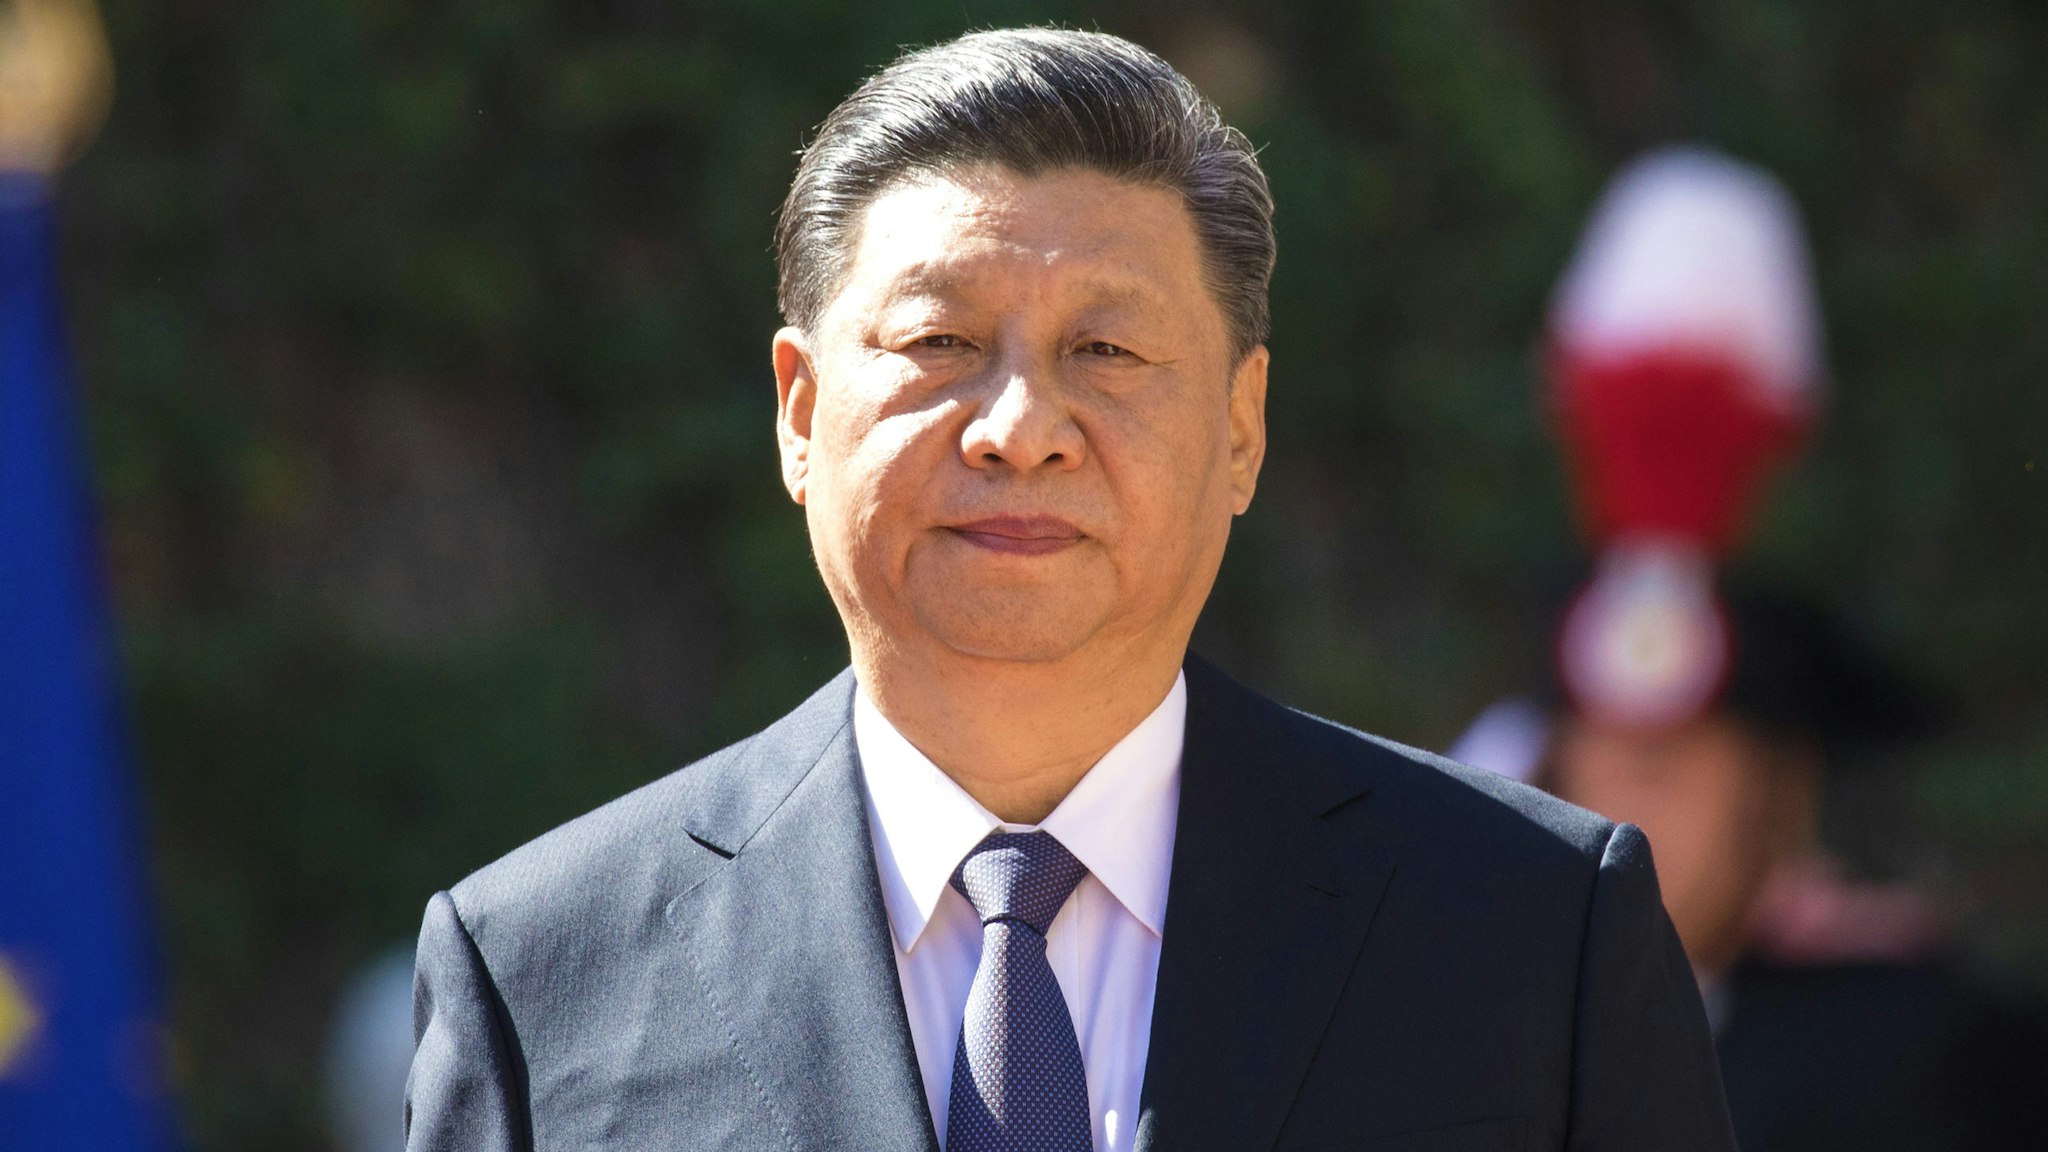 Xi Jinping, China's president, arrives for the signing of the memorandum of understanding on China's Belt and Road Initiative with Giuseppe Conte, Italy's prime minister, not pictured, at Villa Madama in Rome, Italy, on Saturday, March 23, 2019. Xi Jinping recruited Italys populist government into his global Belt and Road development project, with the signing of an accord that has sparked worries in the U.S. and European Union over the Asian powers push for economic domination.